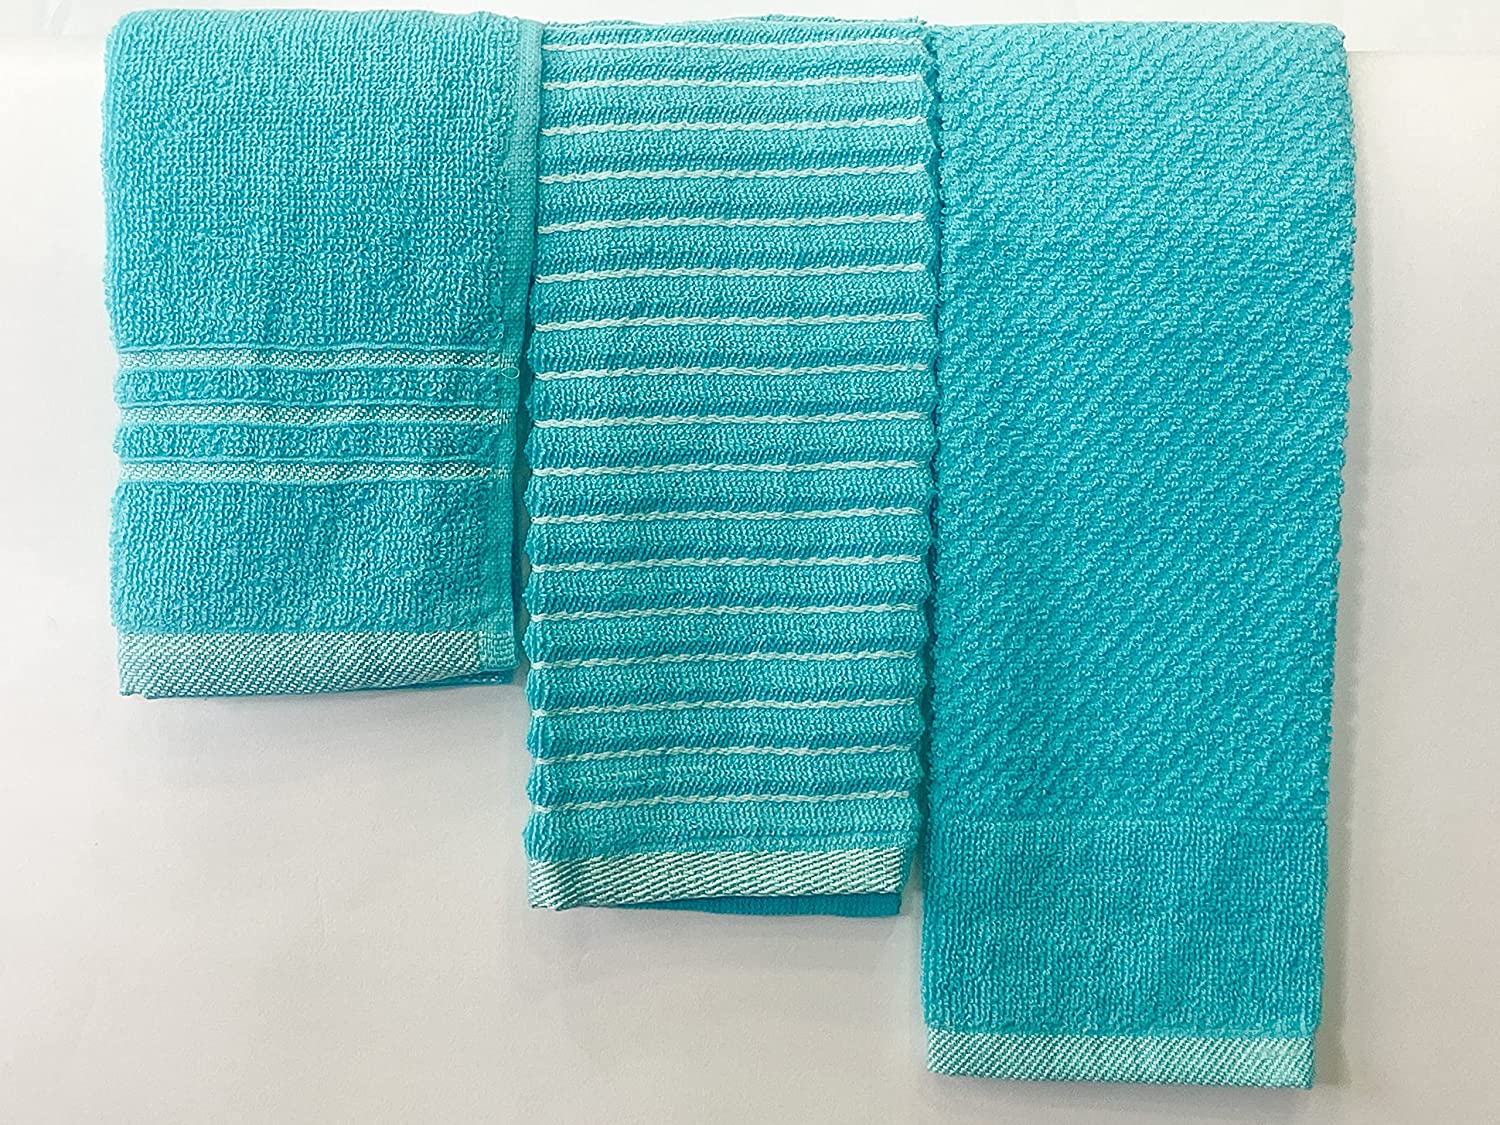 Lushomes Cotton Kitchen Towels, Hand Towel Set of 6, Napkin for Hand Towels, hand towel for wash basin, face towel for men (Pack of 3, 34 x 51 cms, Turquoise)